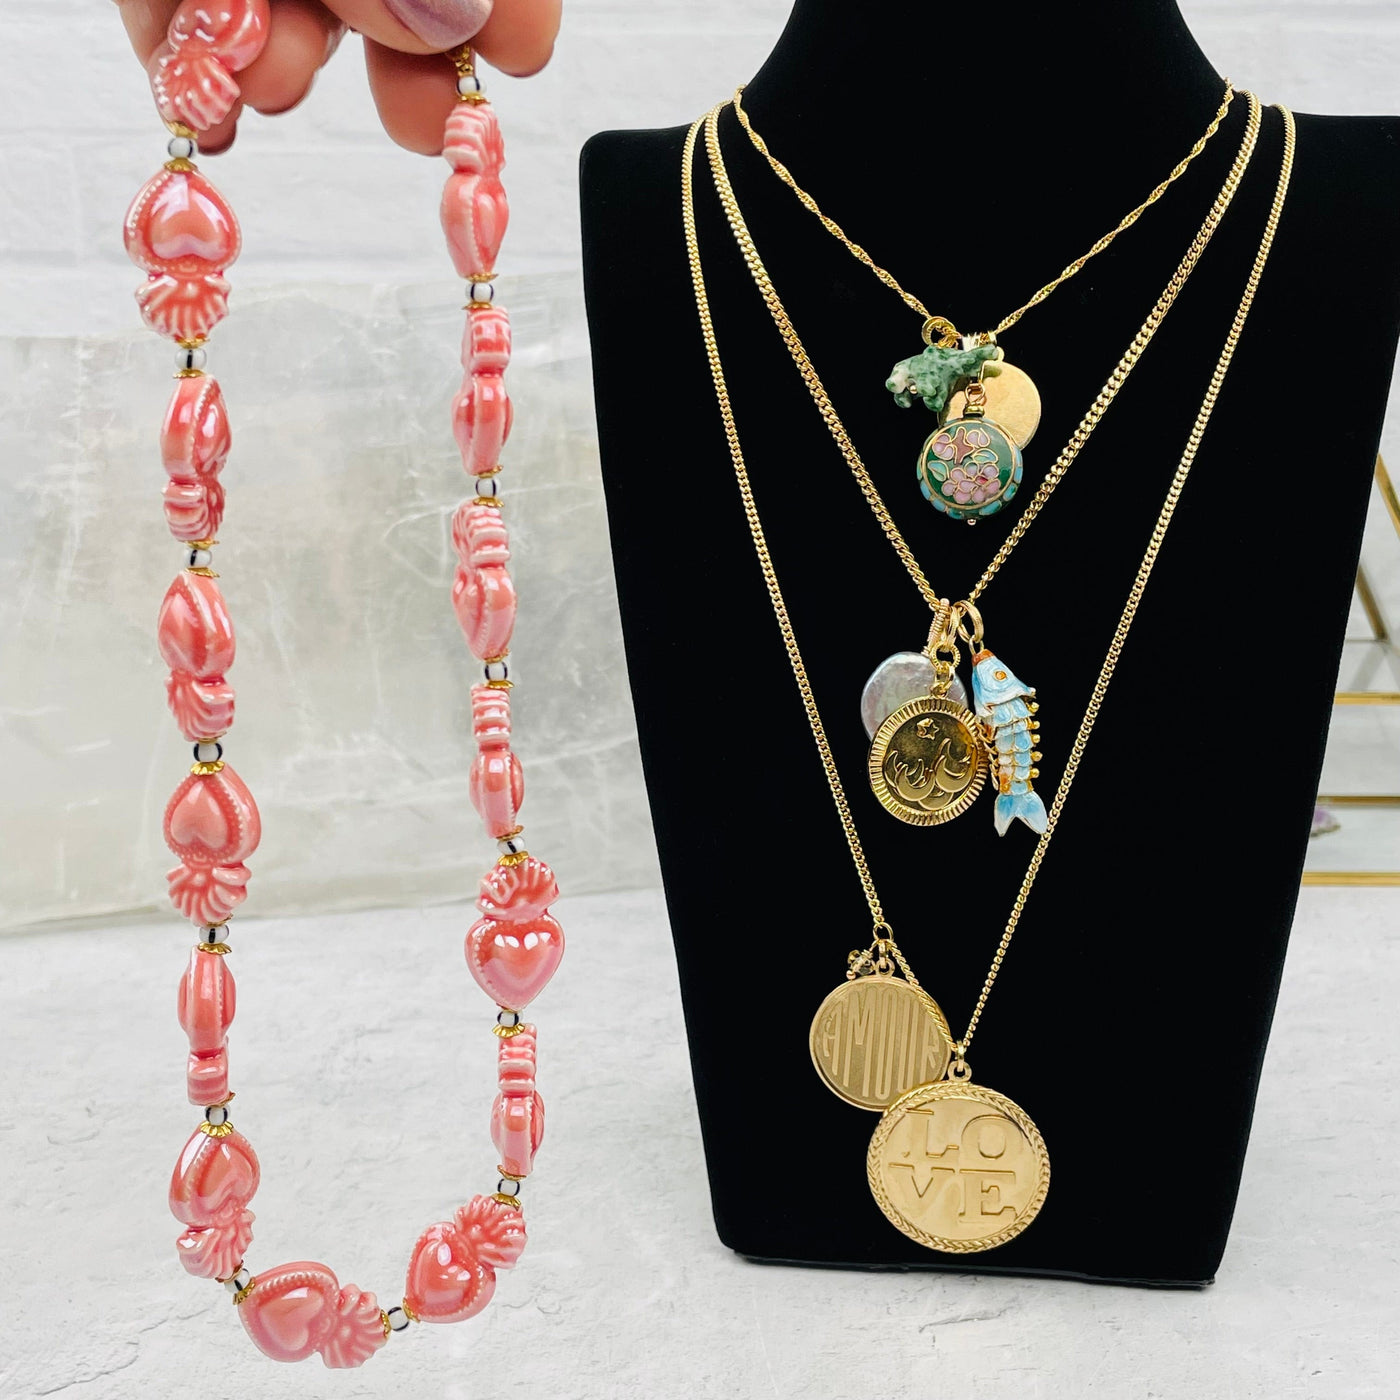 Gold Love Necklaces - You Choose -